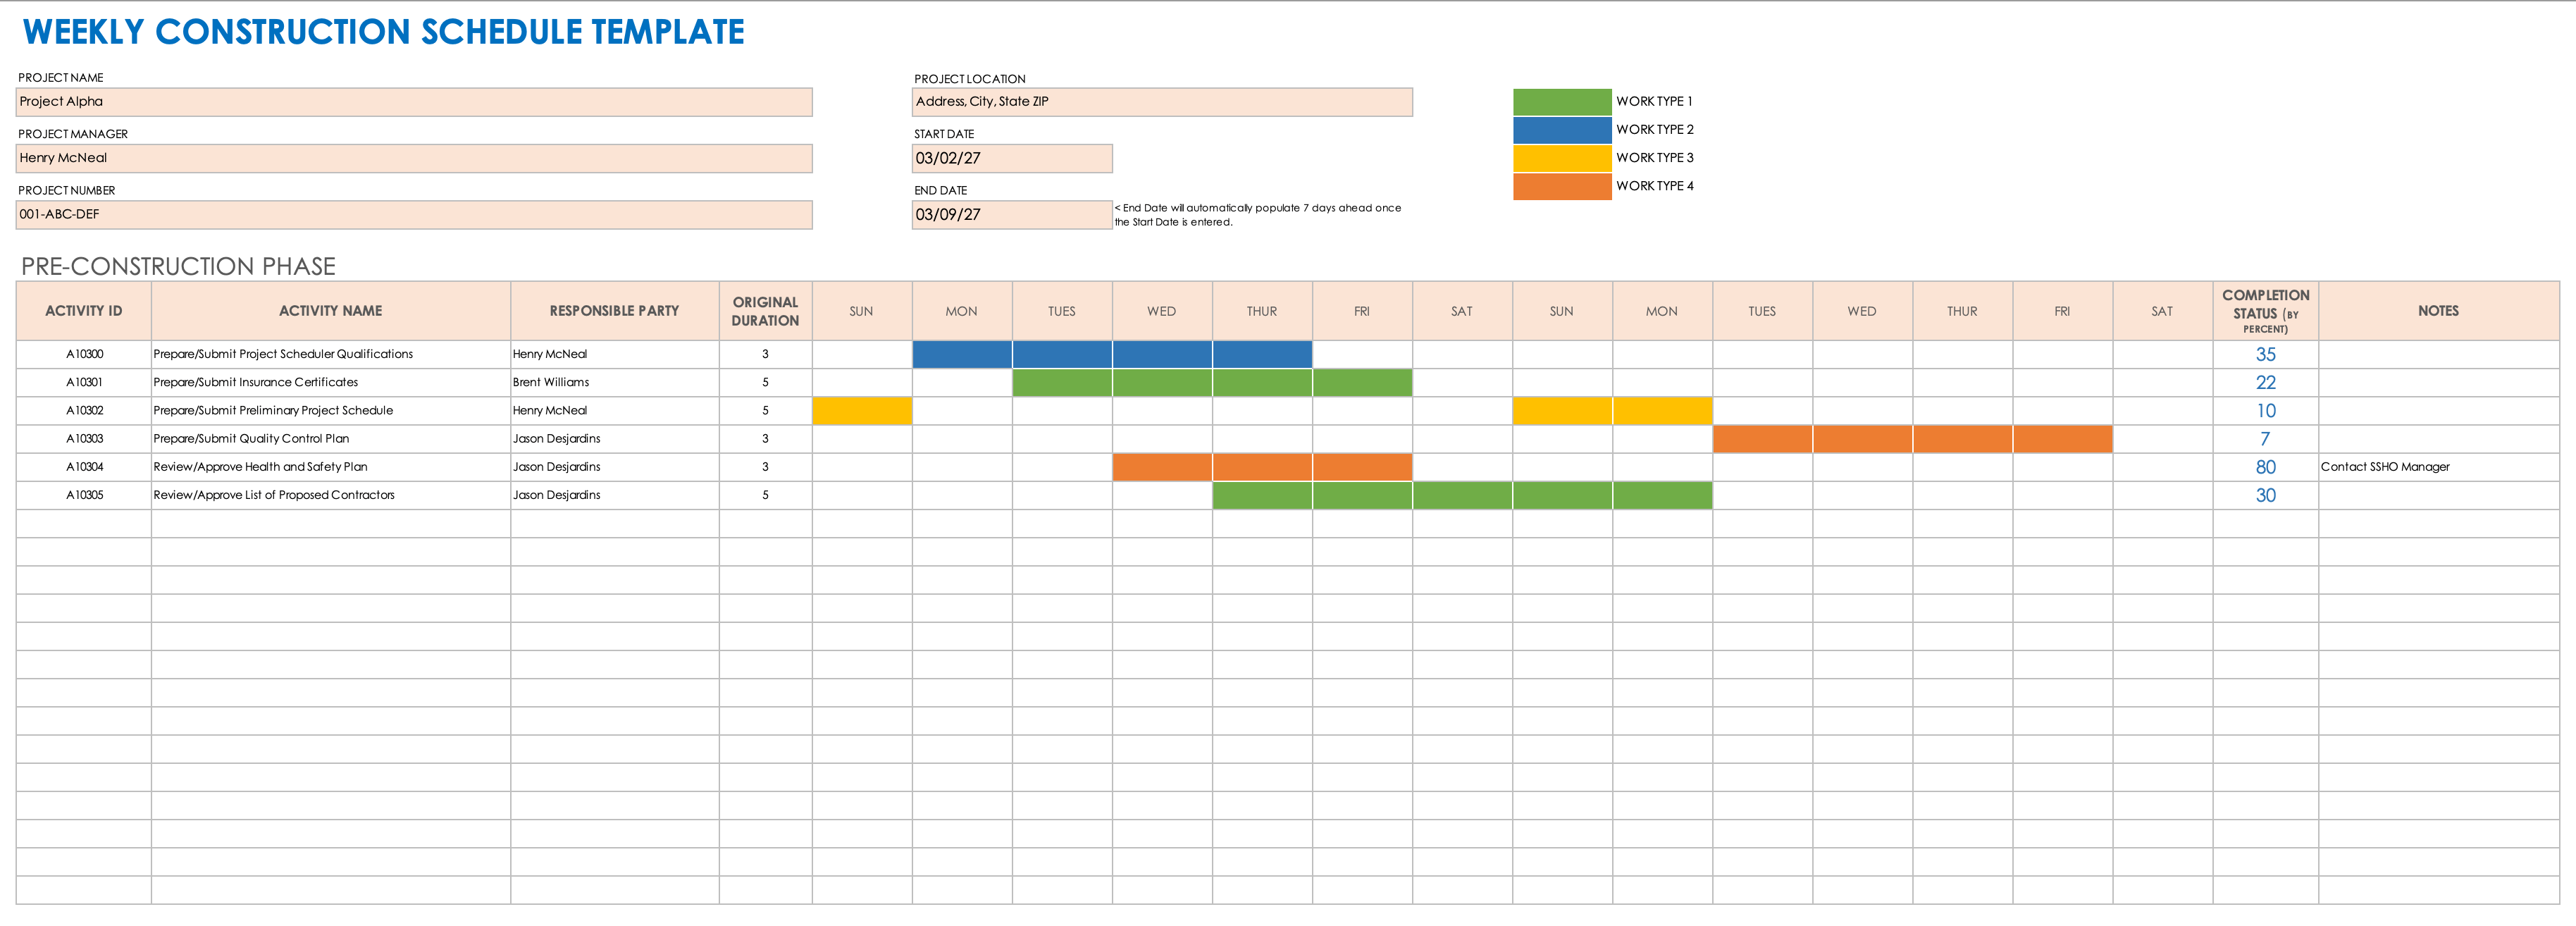 Weekly Construction Schedule Template